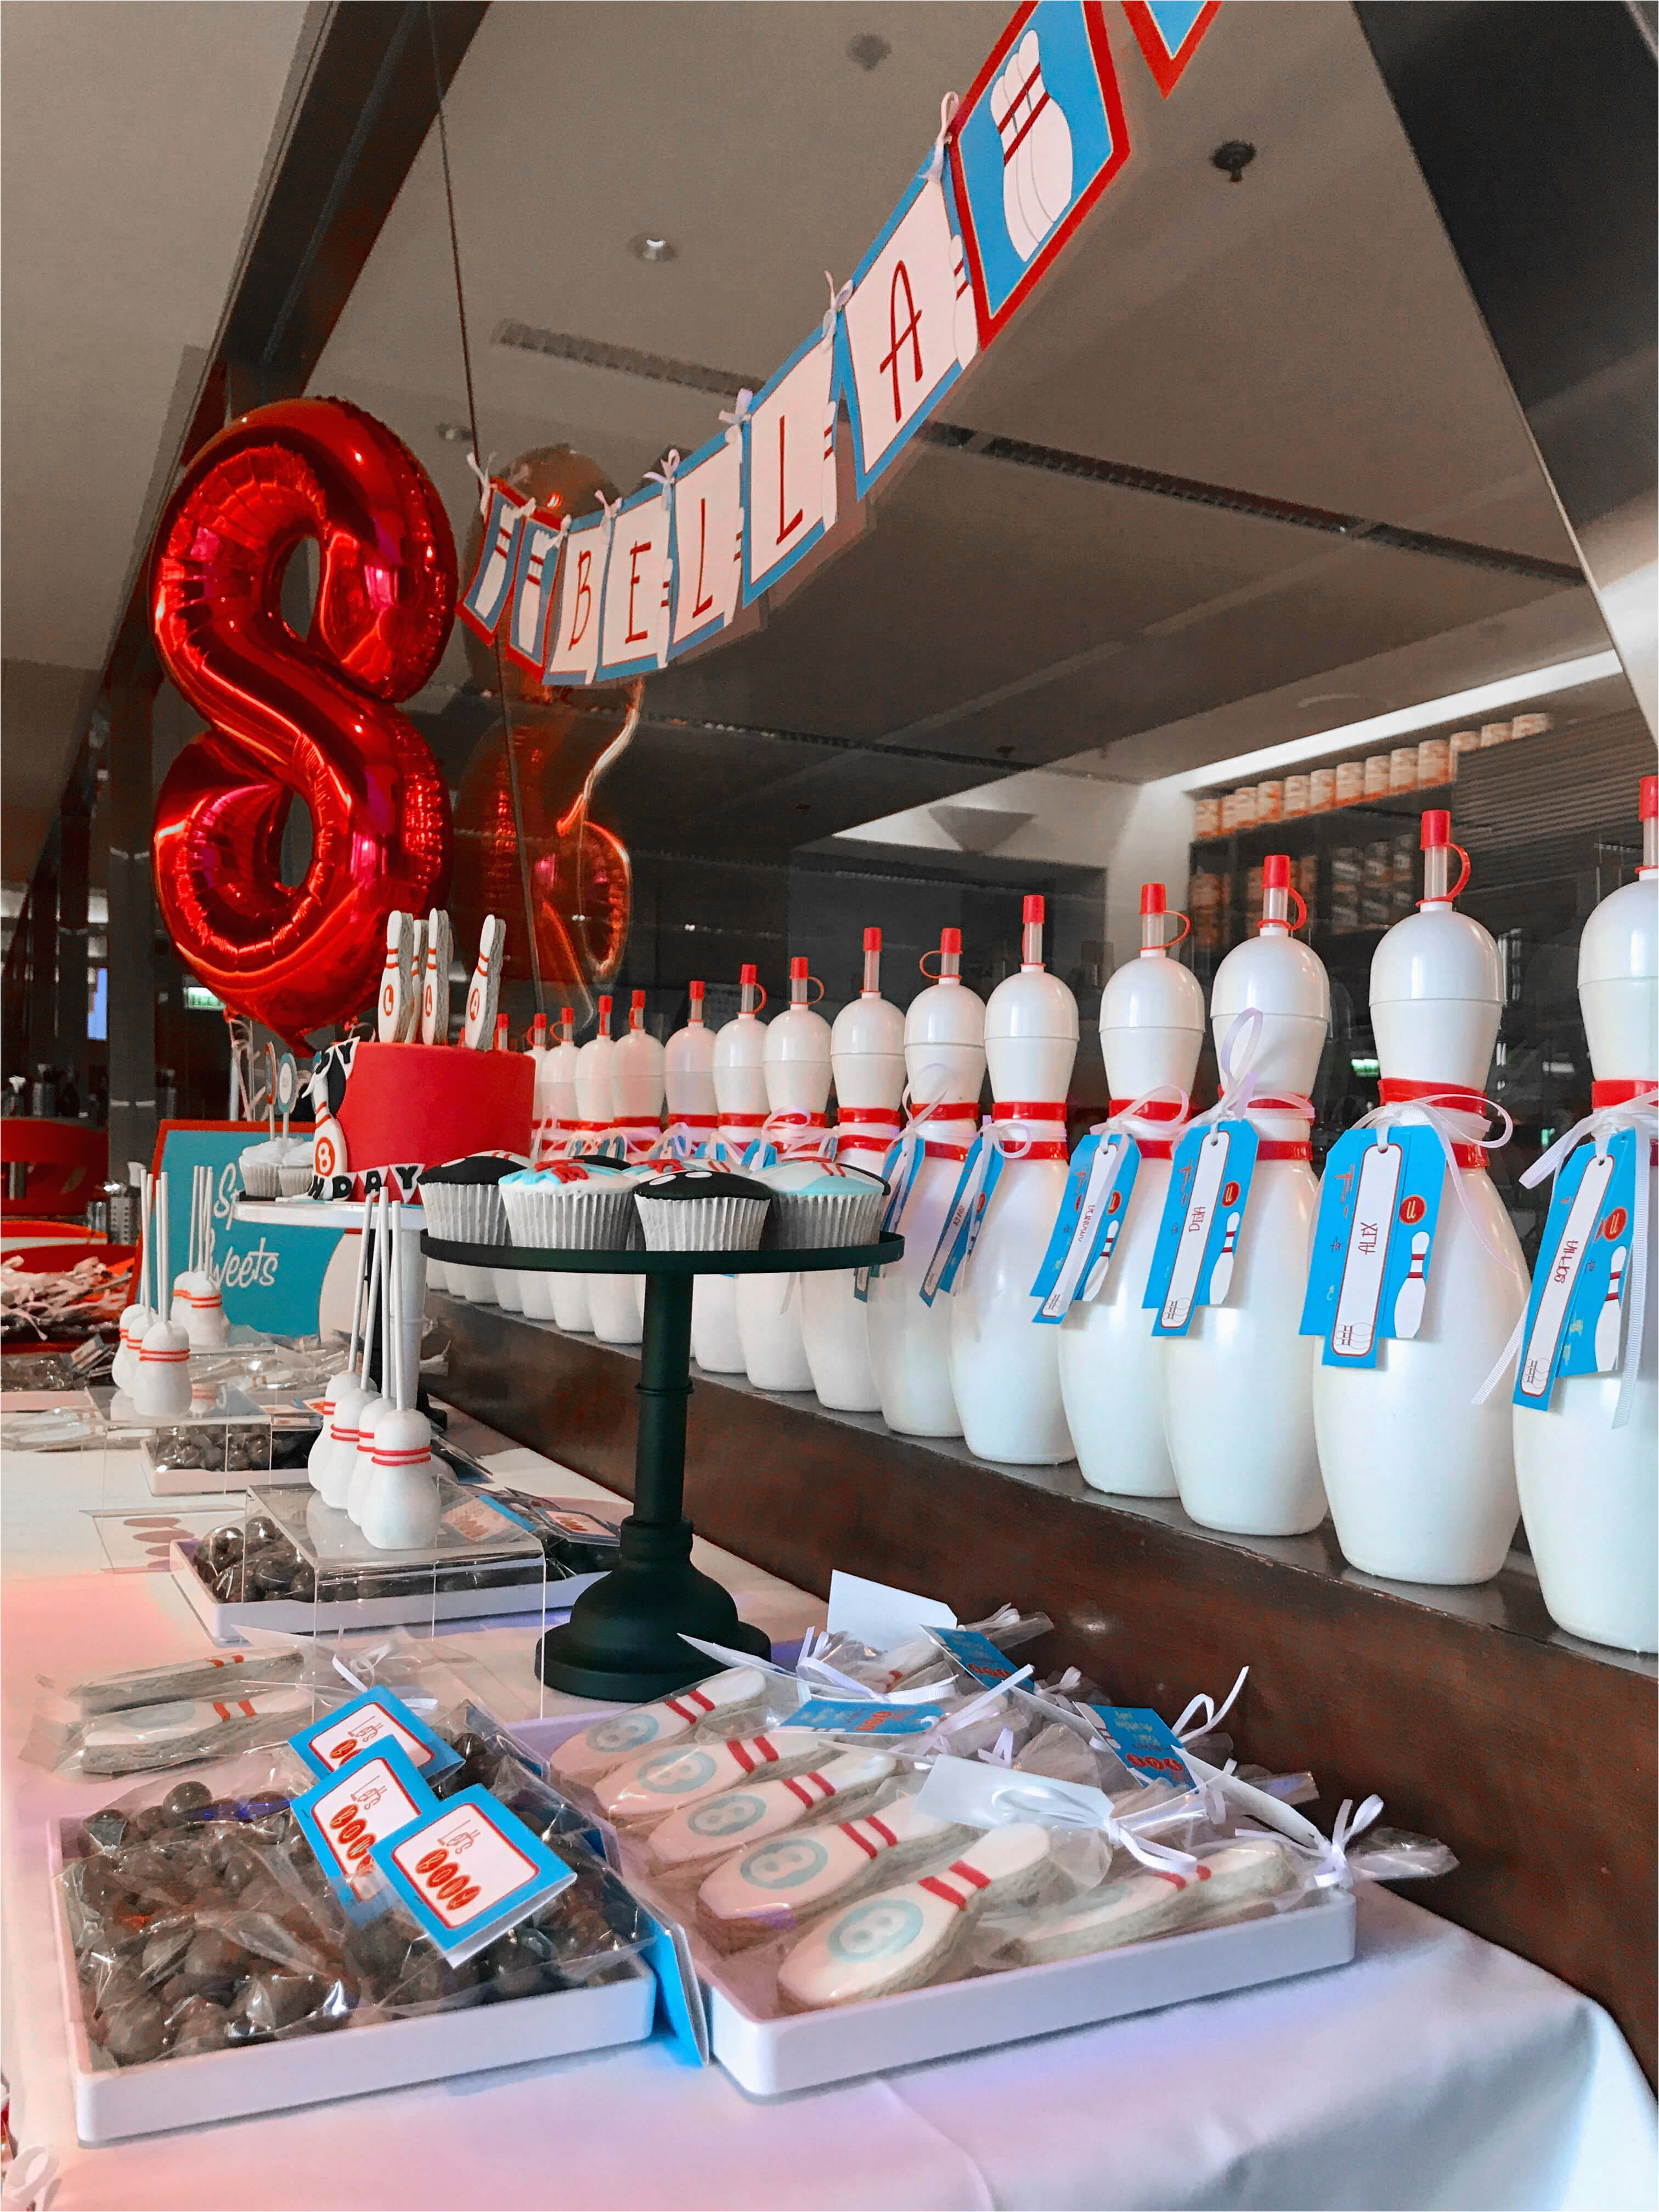 Bowling Birthday Party Decorations Bella 39 S 8th Bowling Birthday Party Bowling theme Party